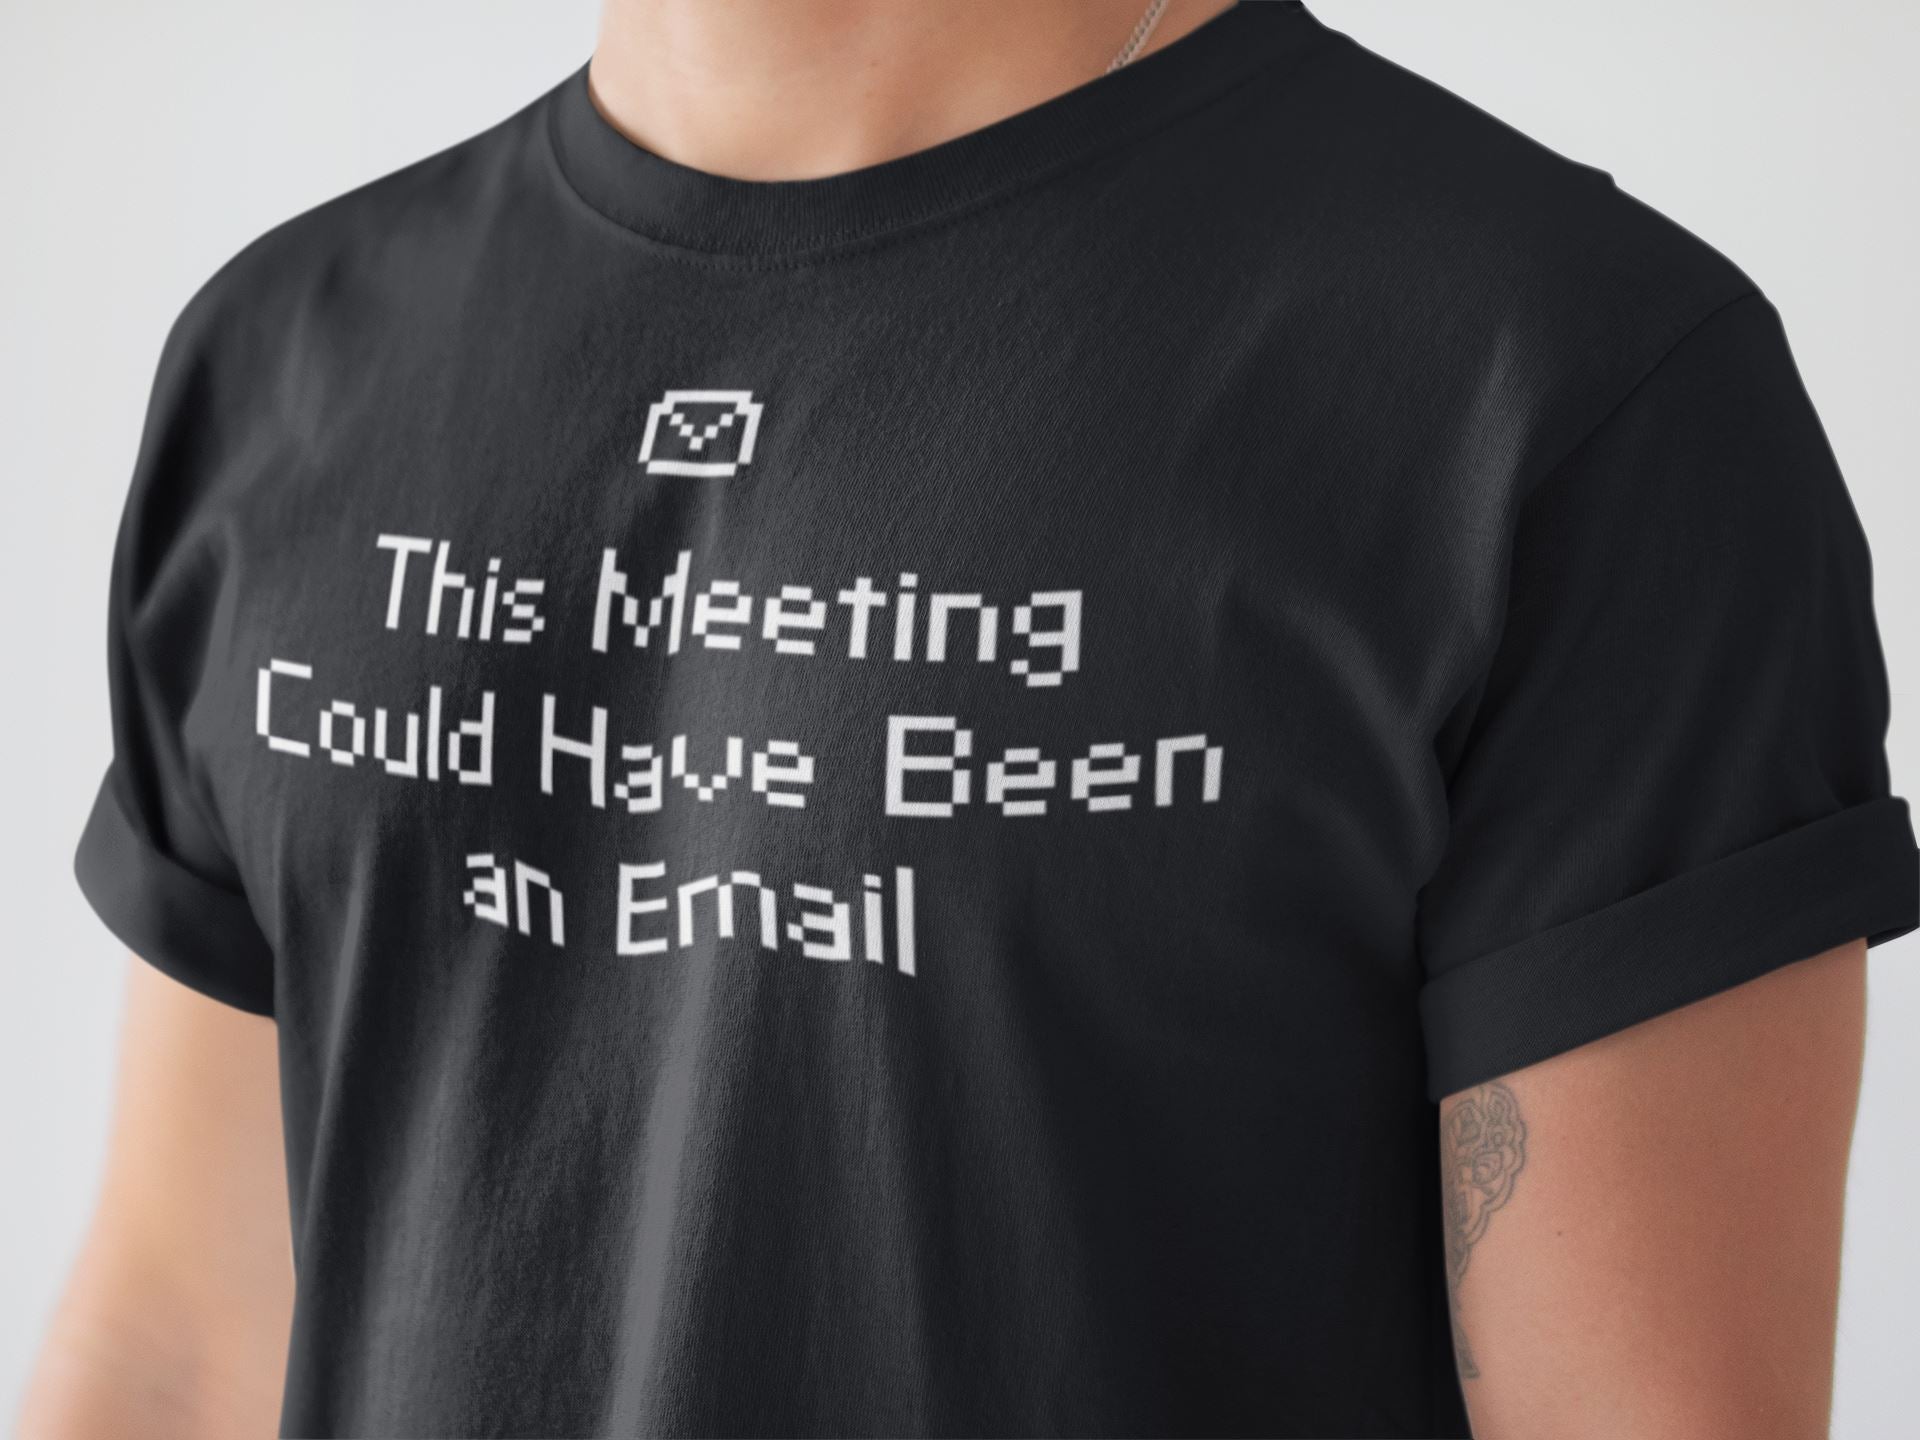 This Meeting Could Have Been an Email Funny Office T Shirt for Men and Women freeshipping - Catch My Drift India